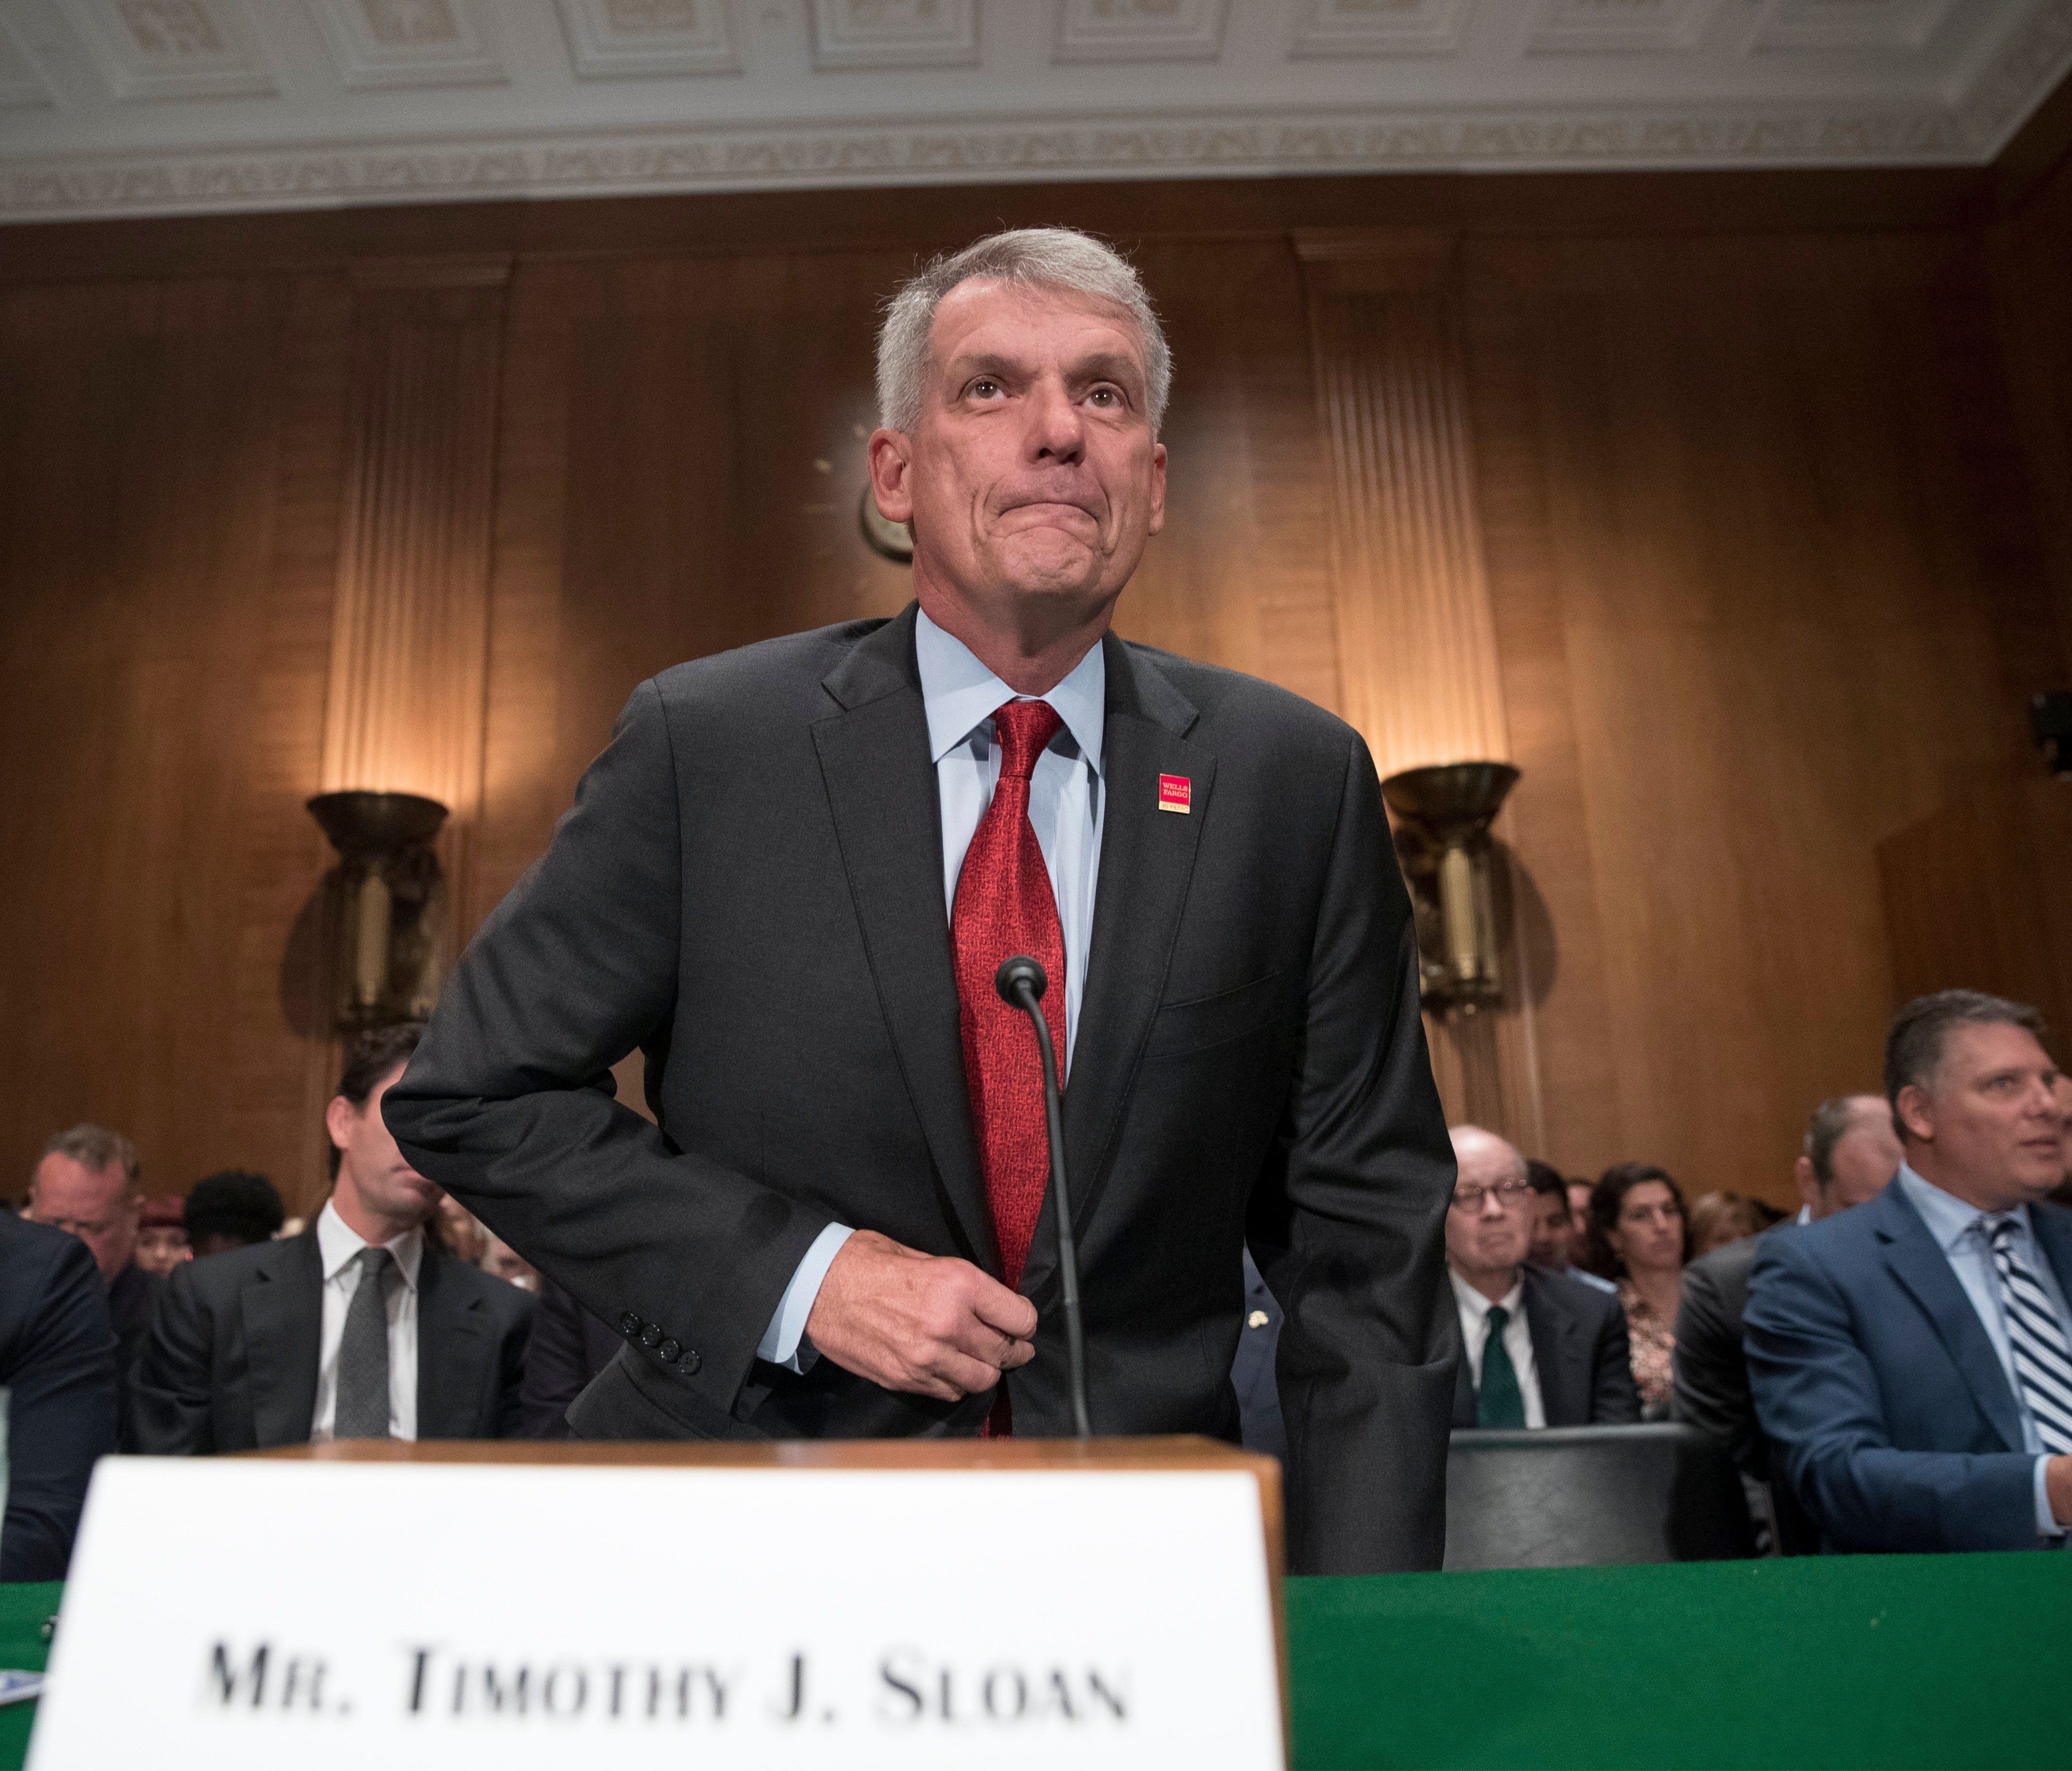 File photo taken in 2017 shows Wells Fargo CEO Timothy Sloan arriving to testify at a hearing by the Senate Banking, Housing and Urban Affairs Committee in Washington, D.C.